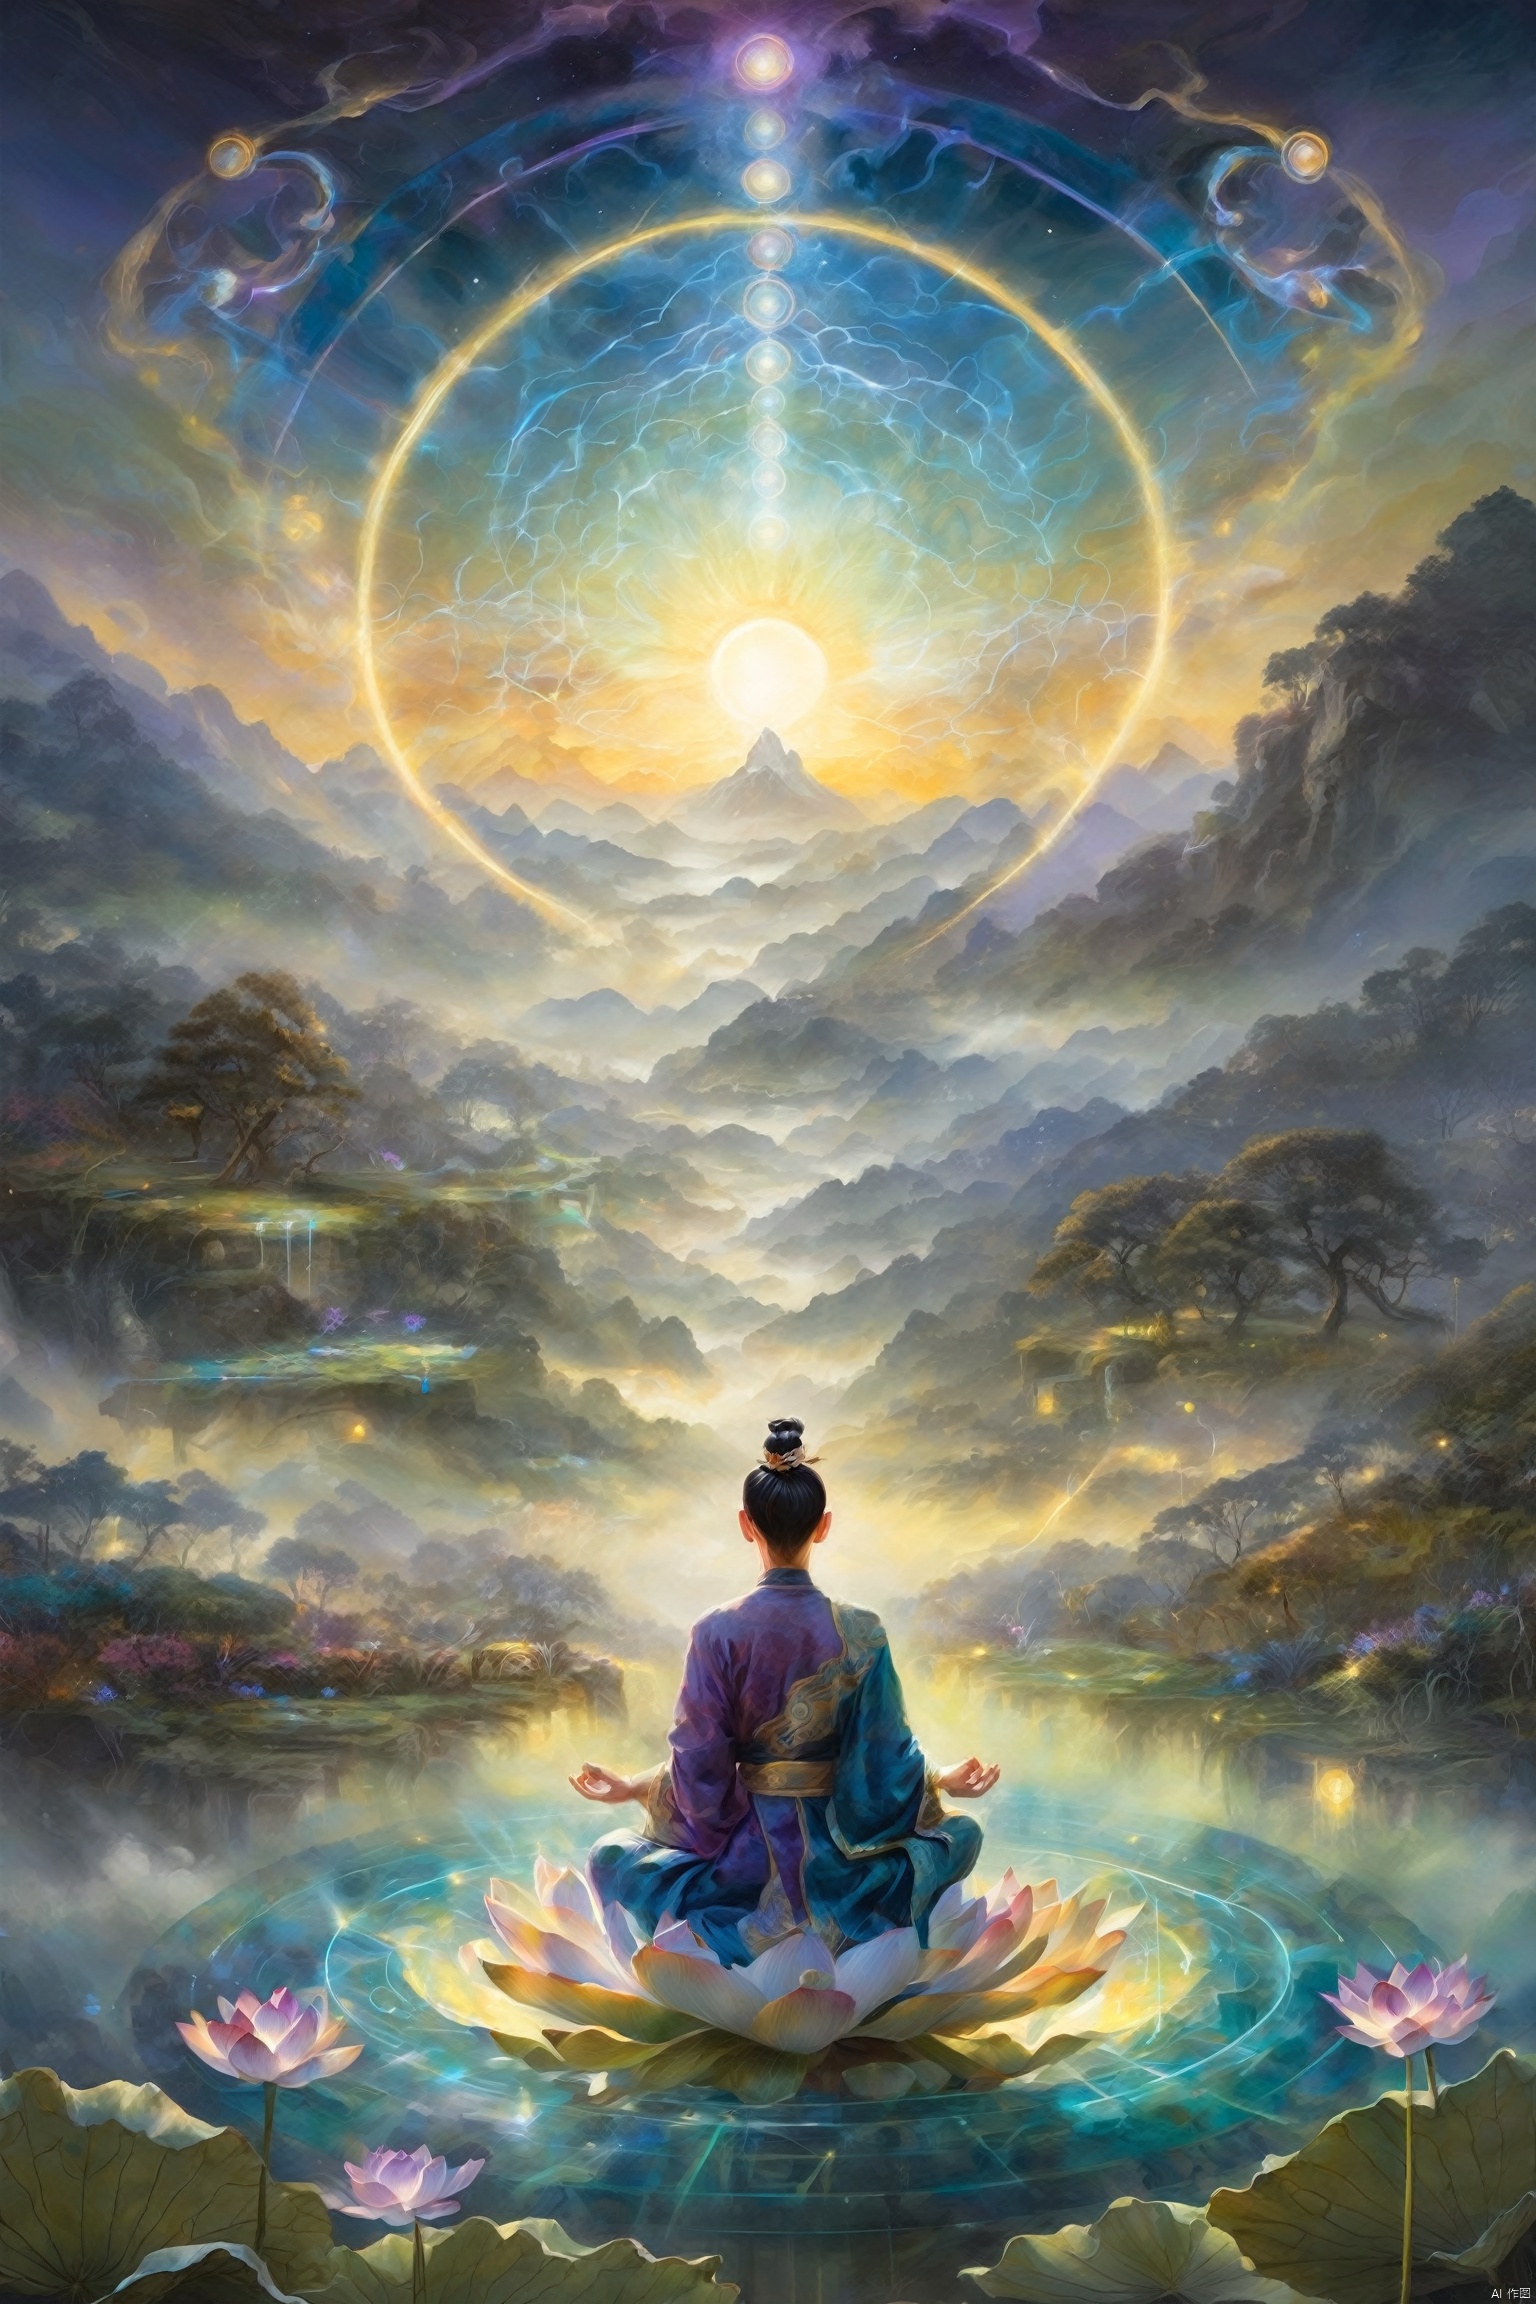  A cultivator in Daoist robes meditates in a valley, with three halos above, interwoven with golden, blue, and purple lights, radiating energy that symbolizes the union of essence, energy, and spirit. The backdrop is a misty landscape painting, with the halos' edges shimmering with a mystical glow, and lotus flowers and cranes adding to the transcendent atmosphere of cultivation.